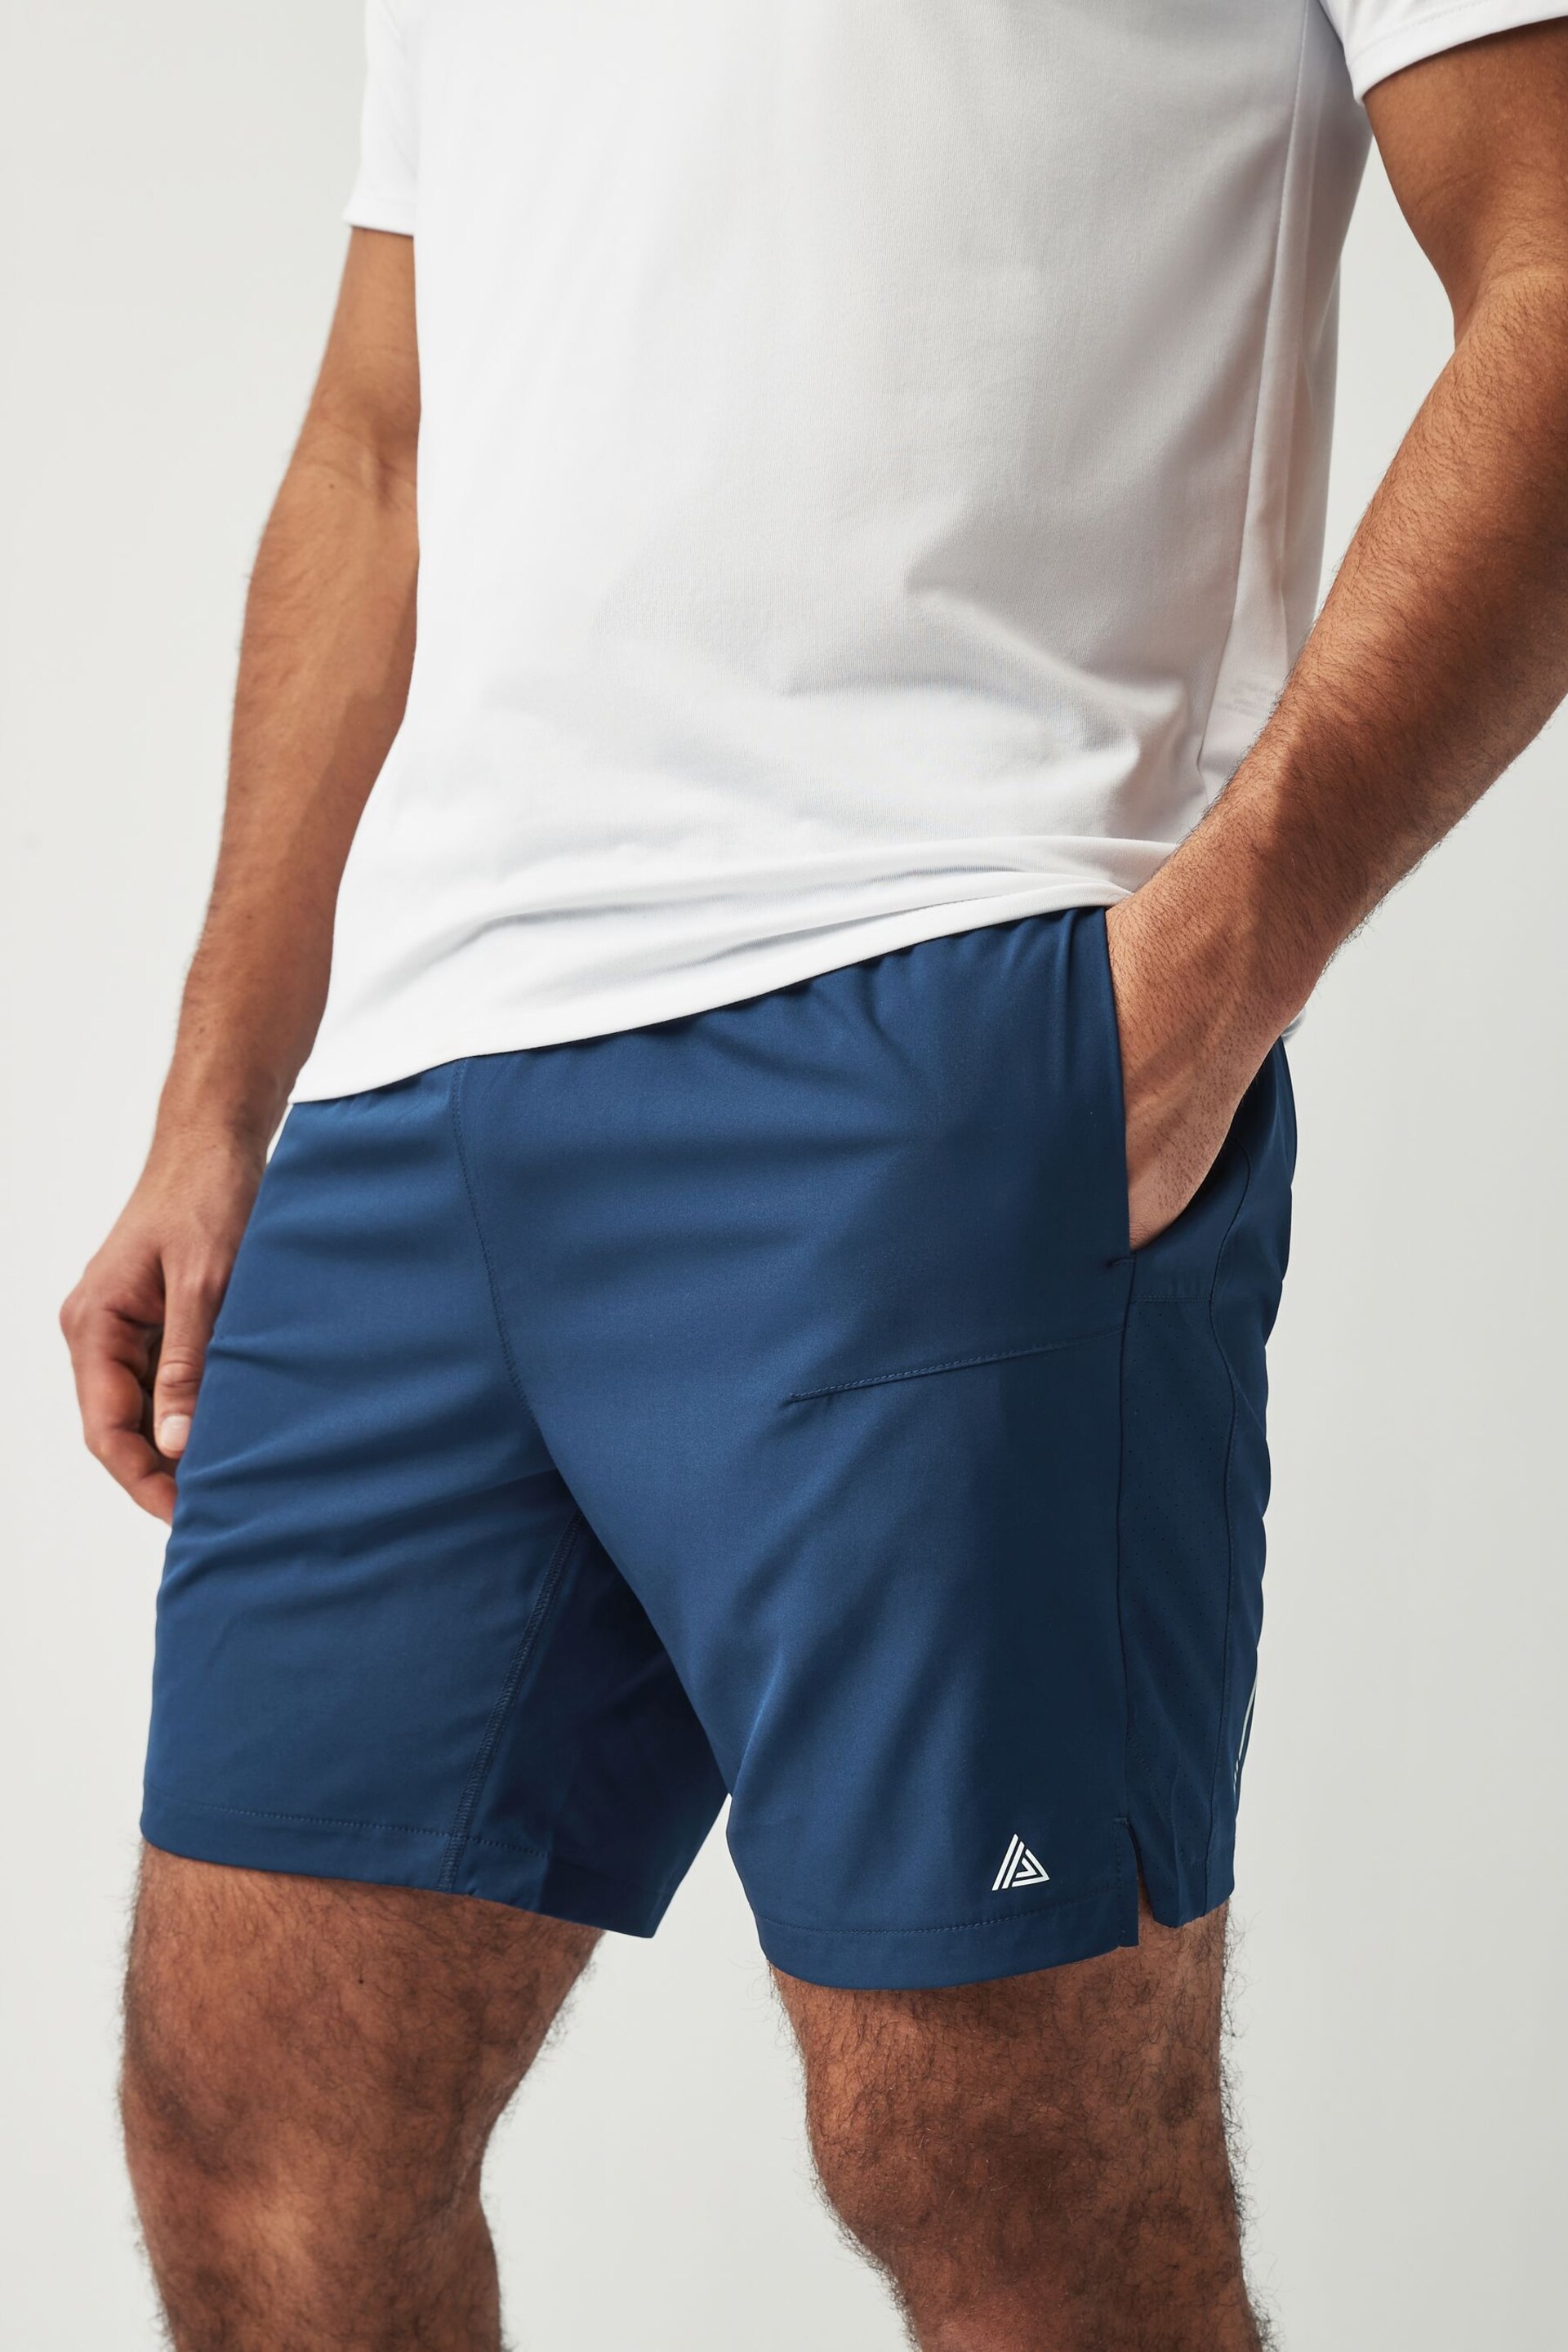 Blue 7 Inch Active Gym Sports Shorts - Image 1 of 10